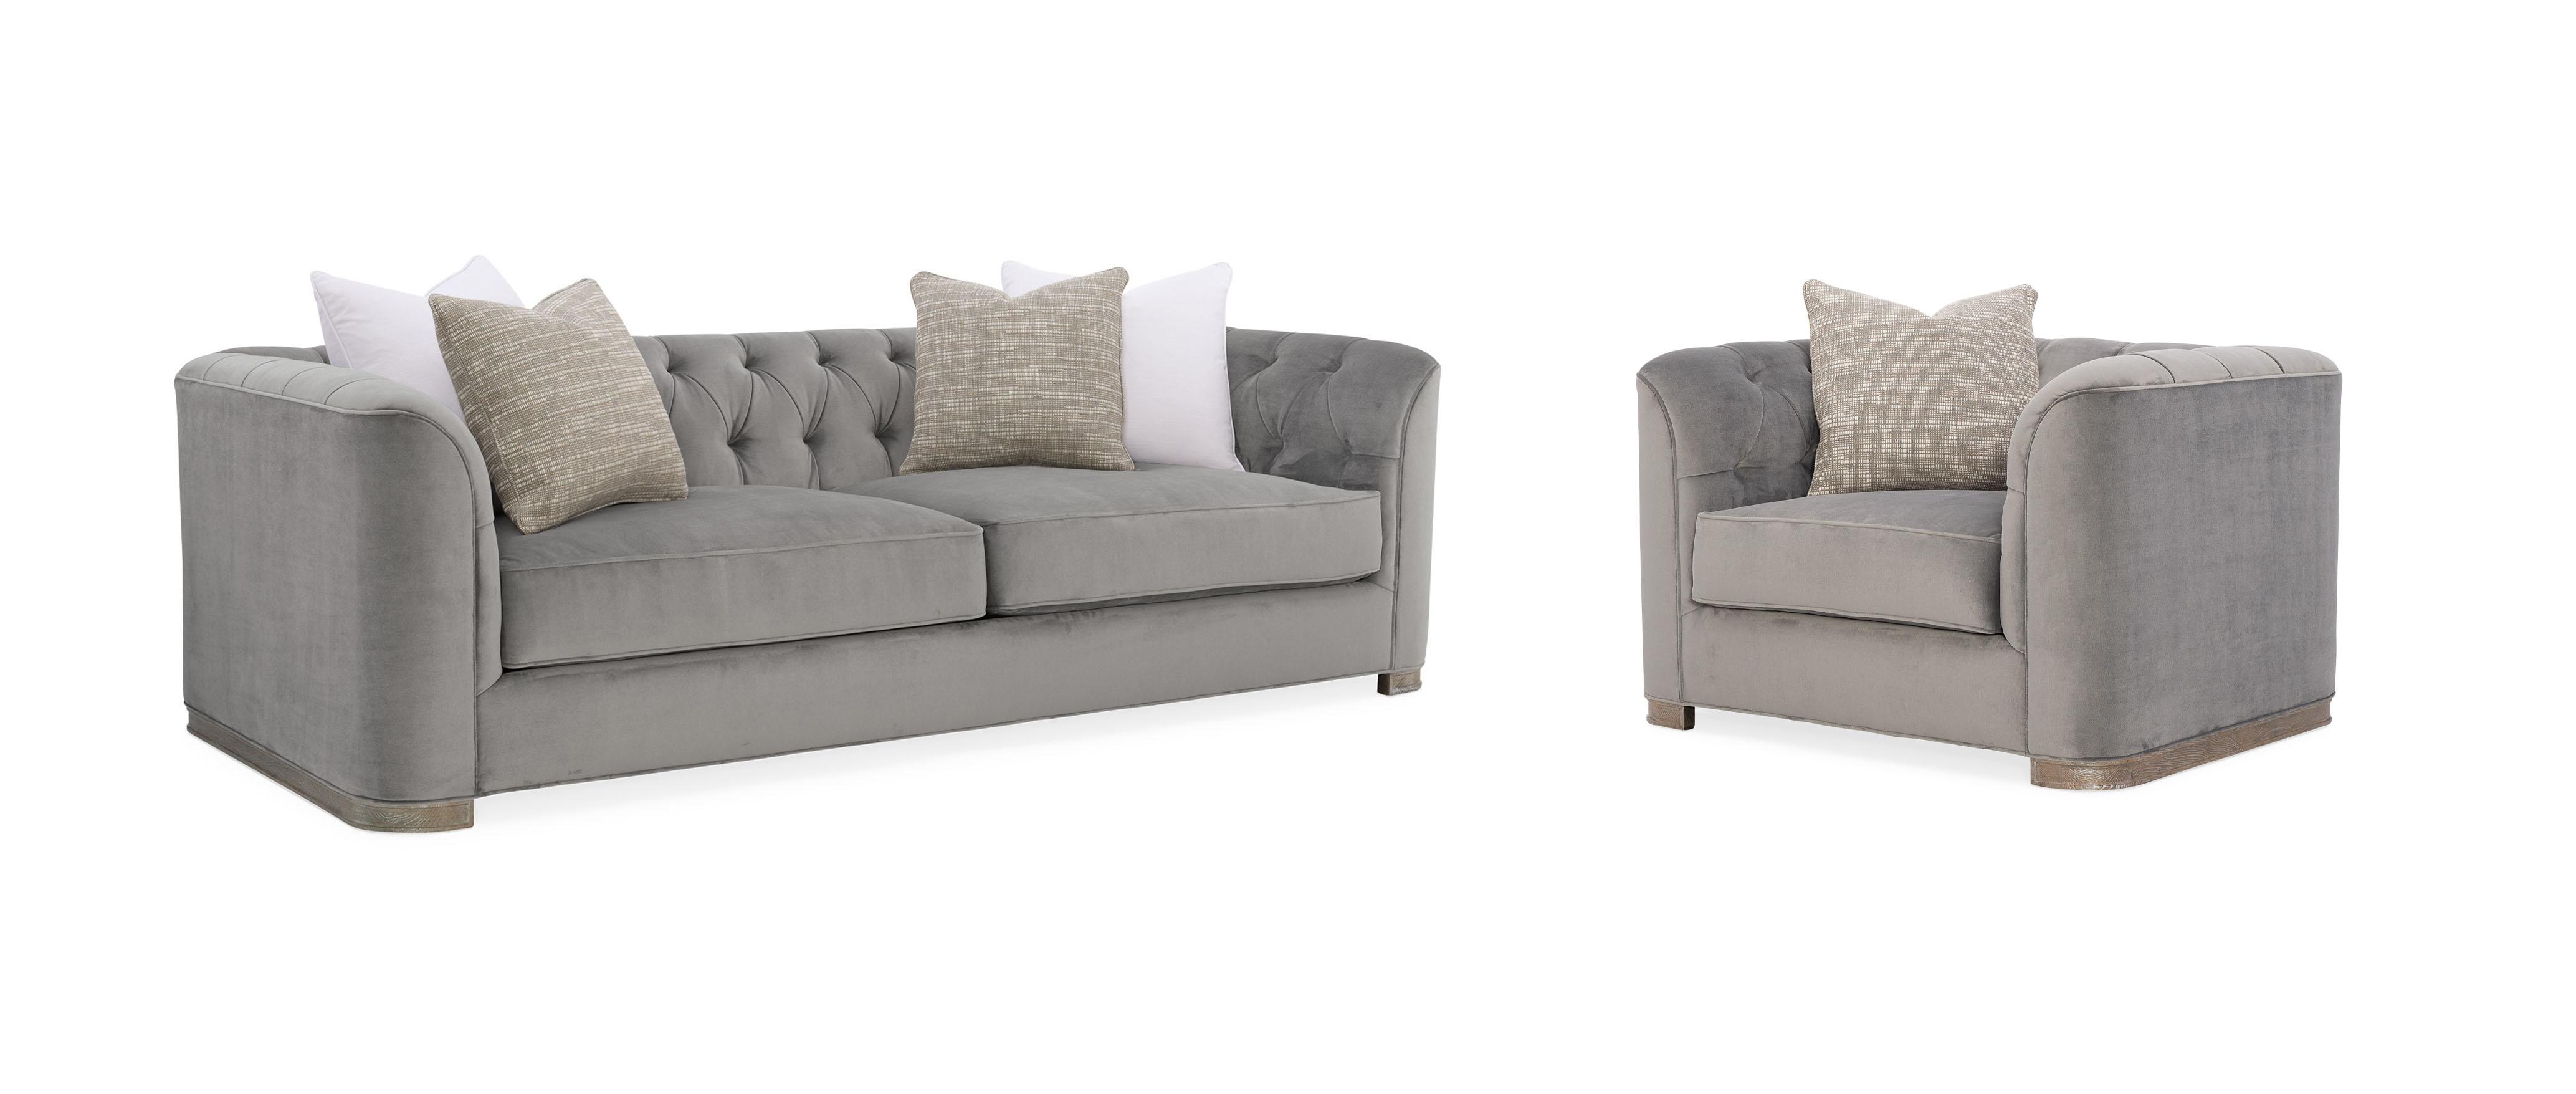 Contemporary Sofa and Chair TUFT GUY UPH-019-013-A-Set-2 in Driftwood, Gray Linen